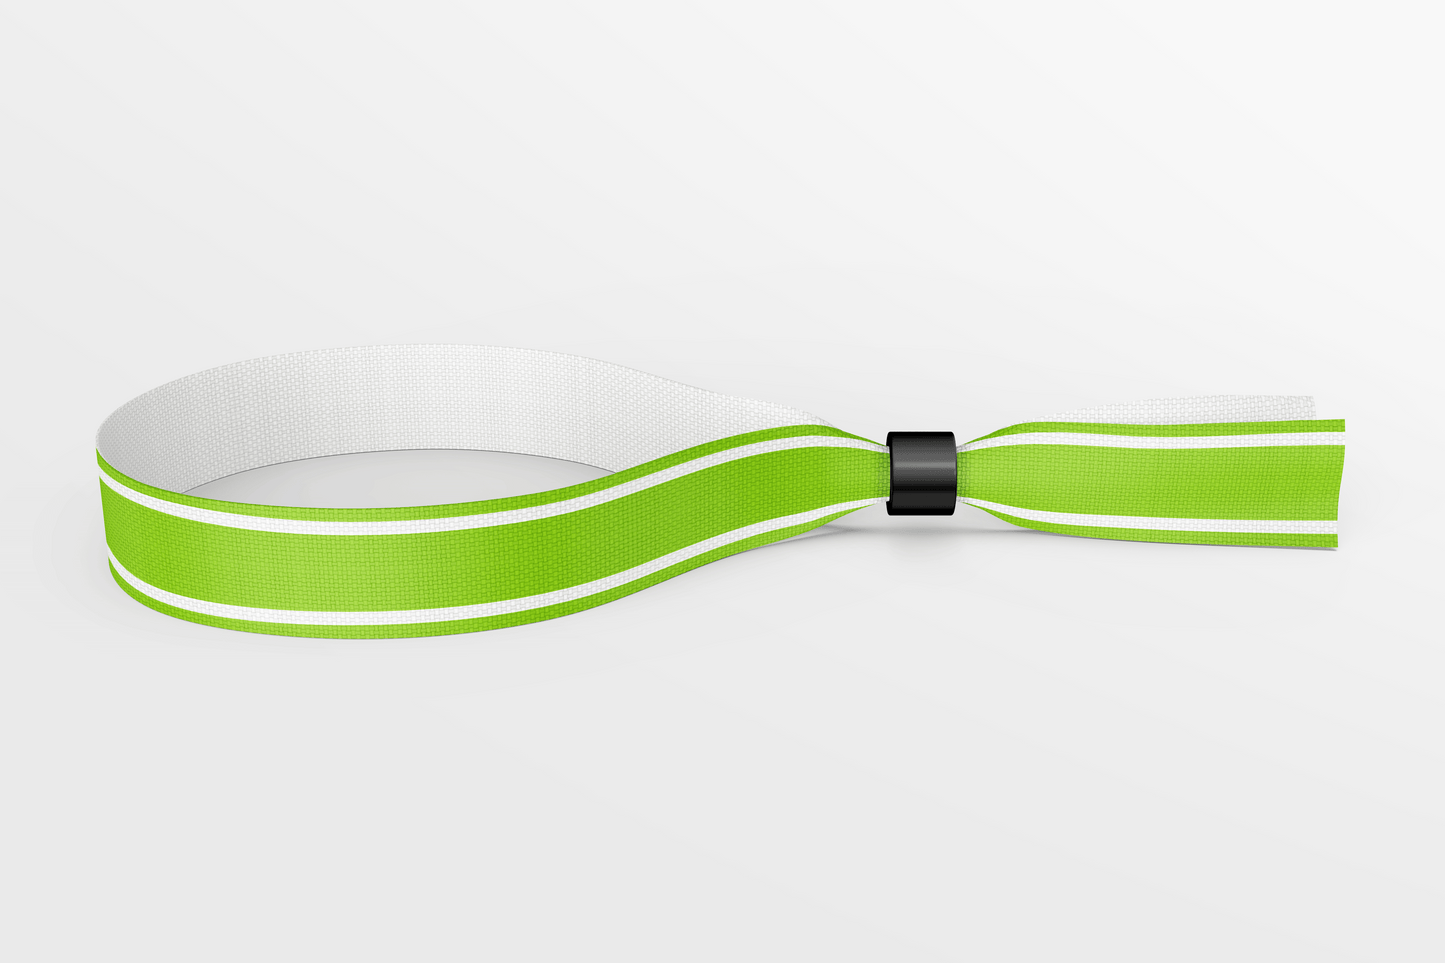 Fabric Wristbands in Stock Fabric Wristbands JM Band UK 50 Green White 